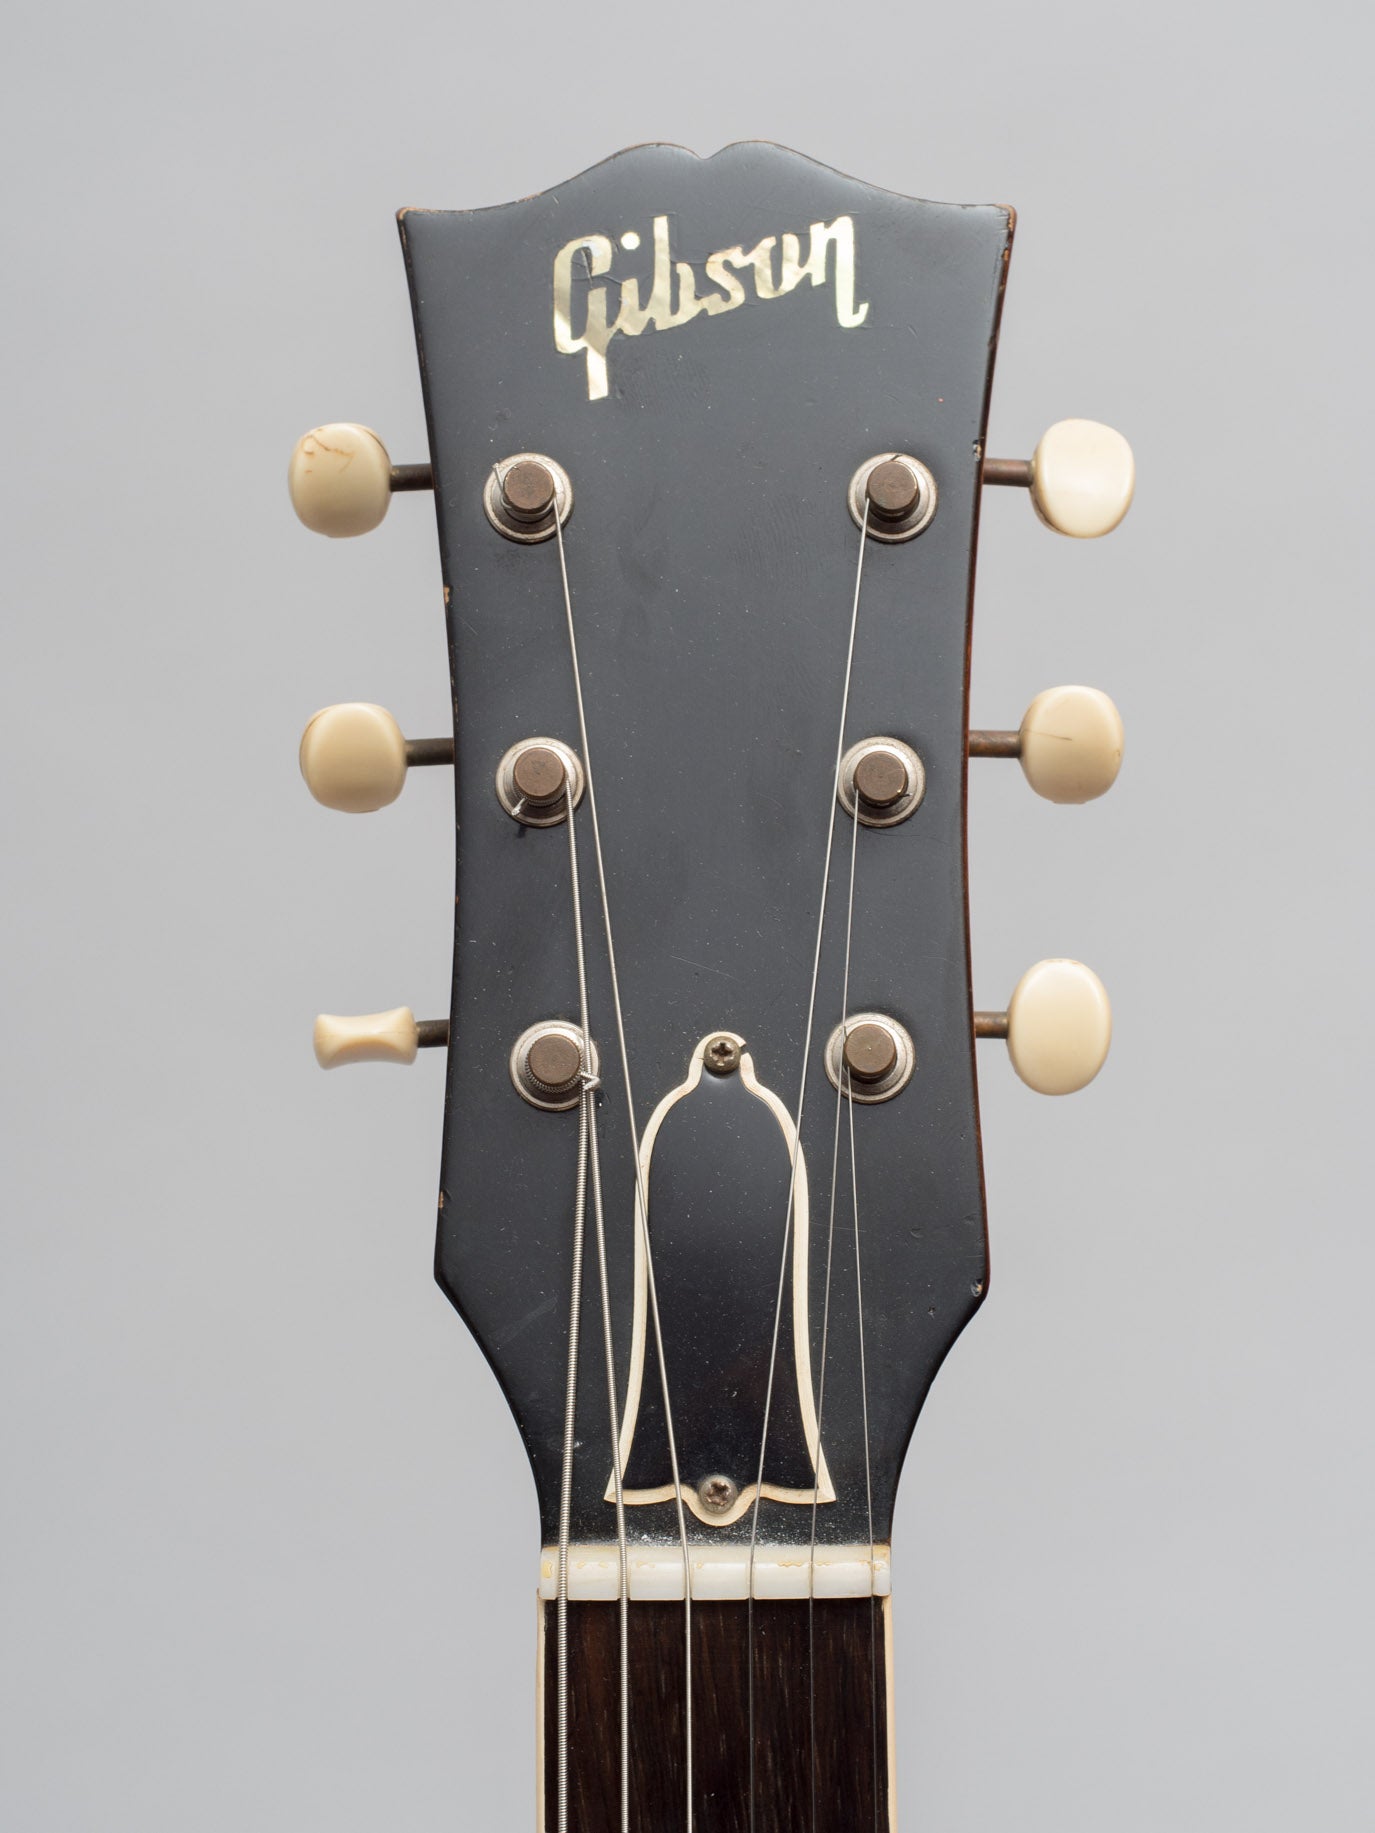 1960 Gibson Les Paul Special